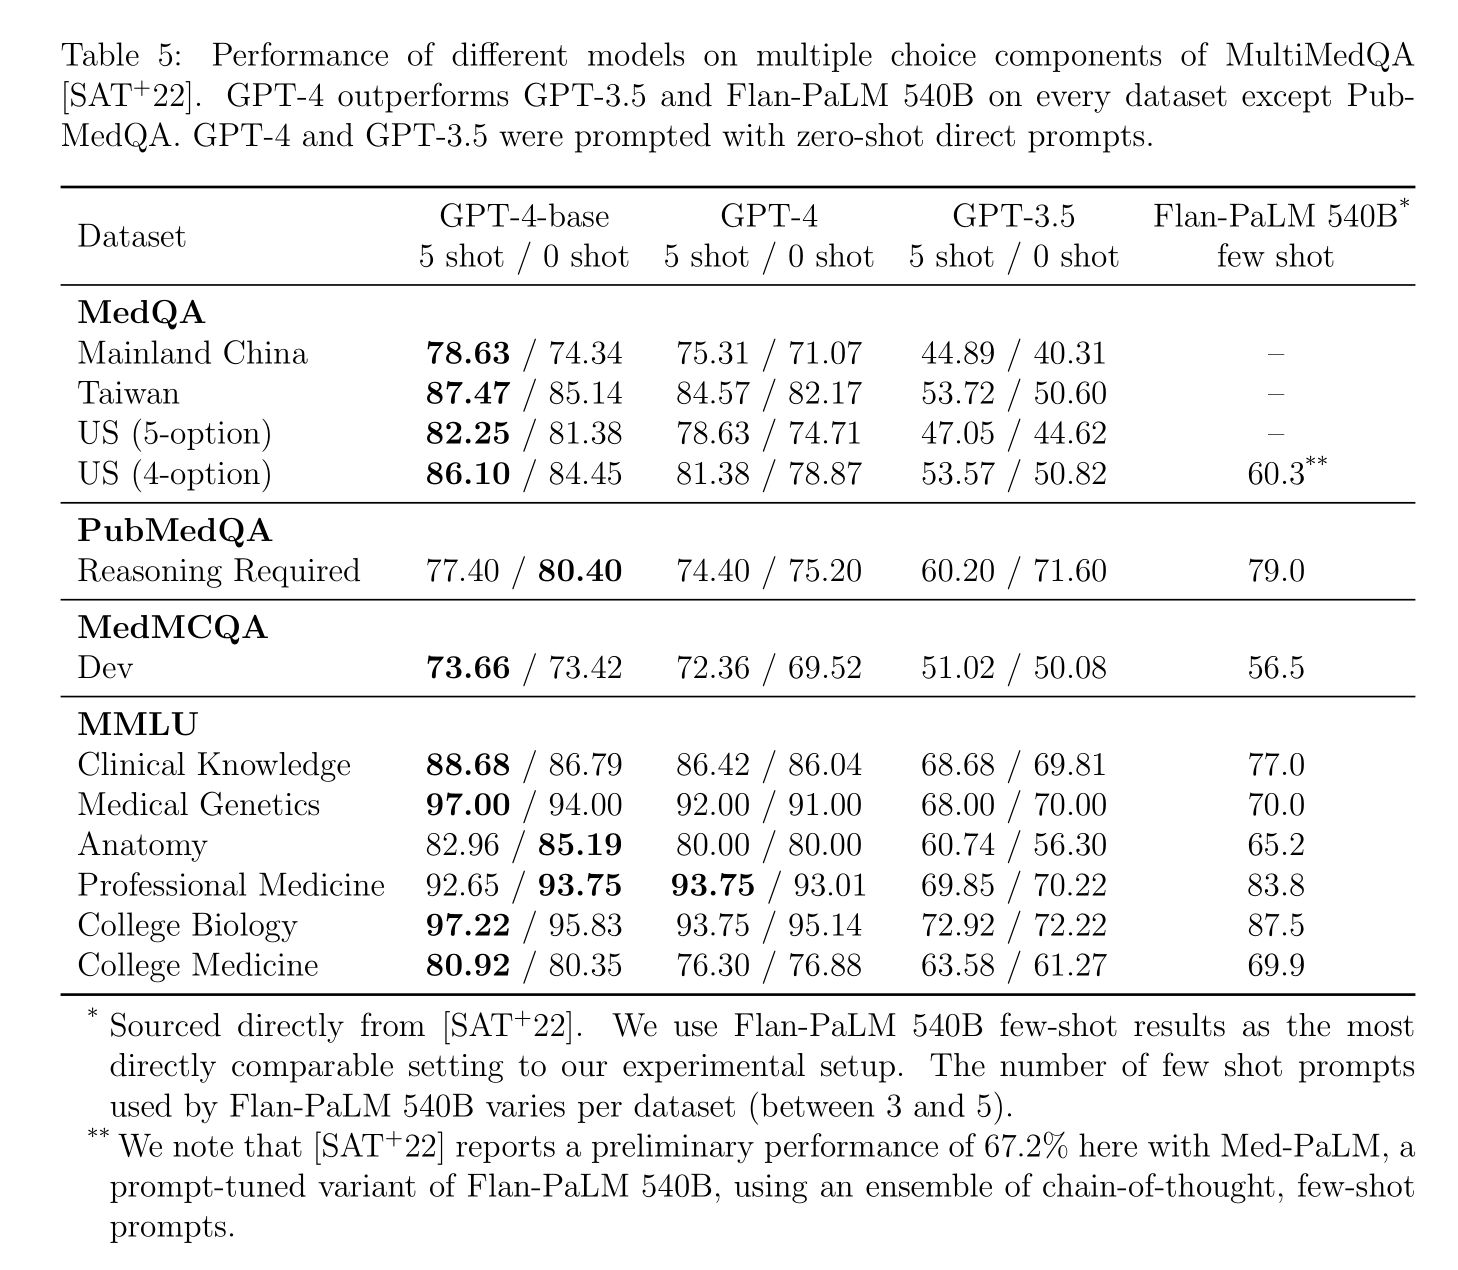 Table 5: Performance of different models on multiple choice components of MultiMedQA. GPT-4 outperforms GPT-3.5 and Flan-PaLM 540B on every dataset except PubMedQA. GPT-4 and GPT-3.5 were prompted with zero-shot direct prompts.